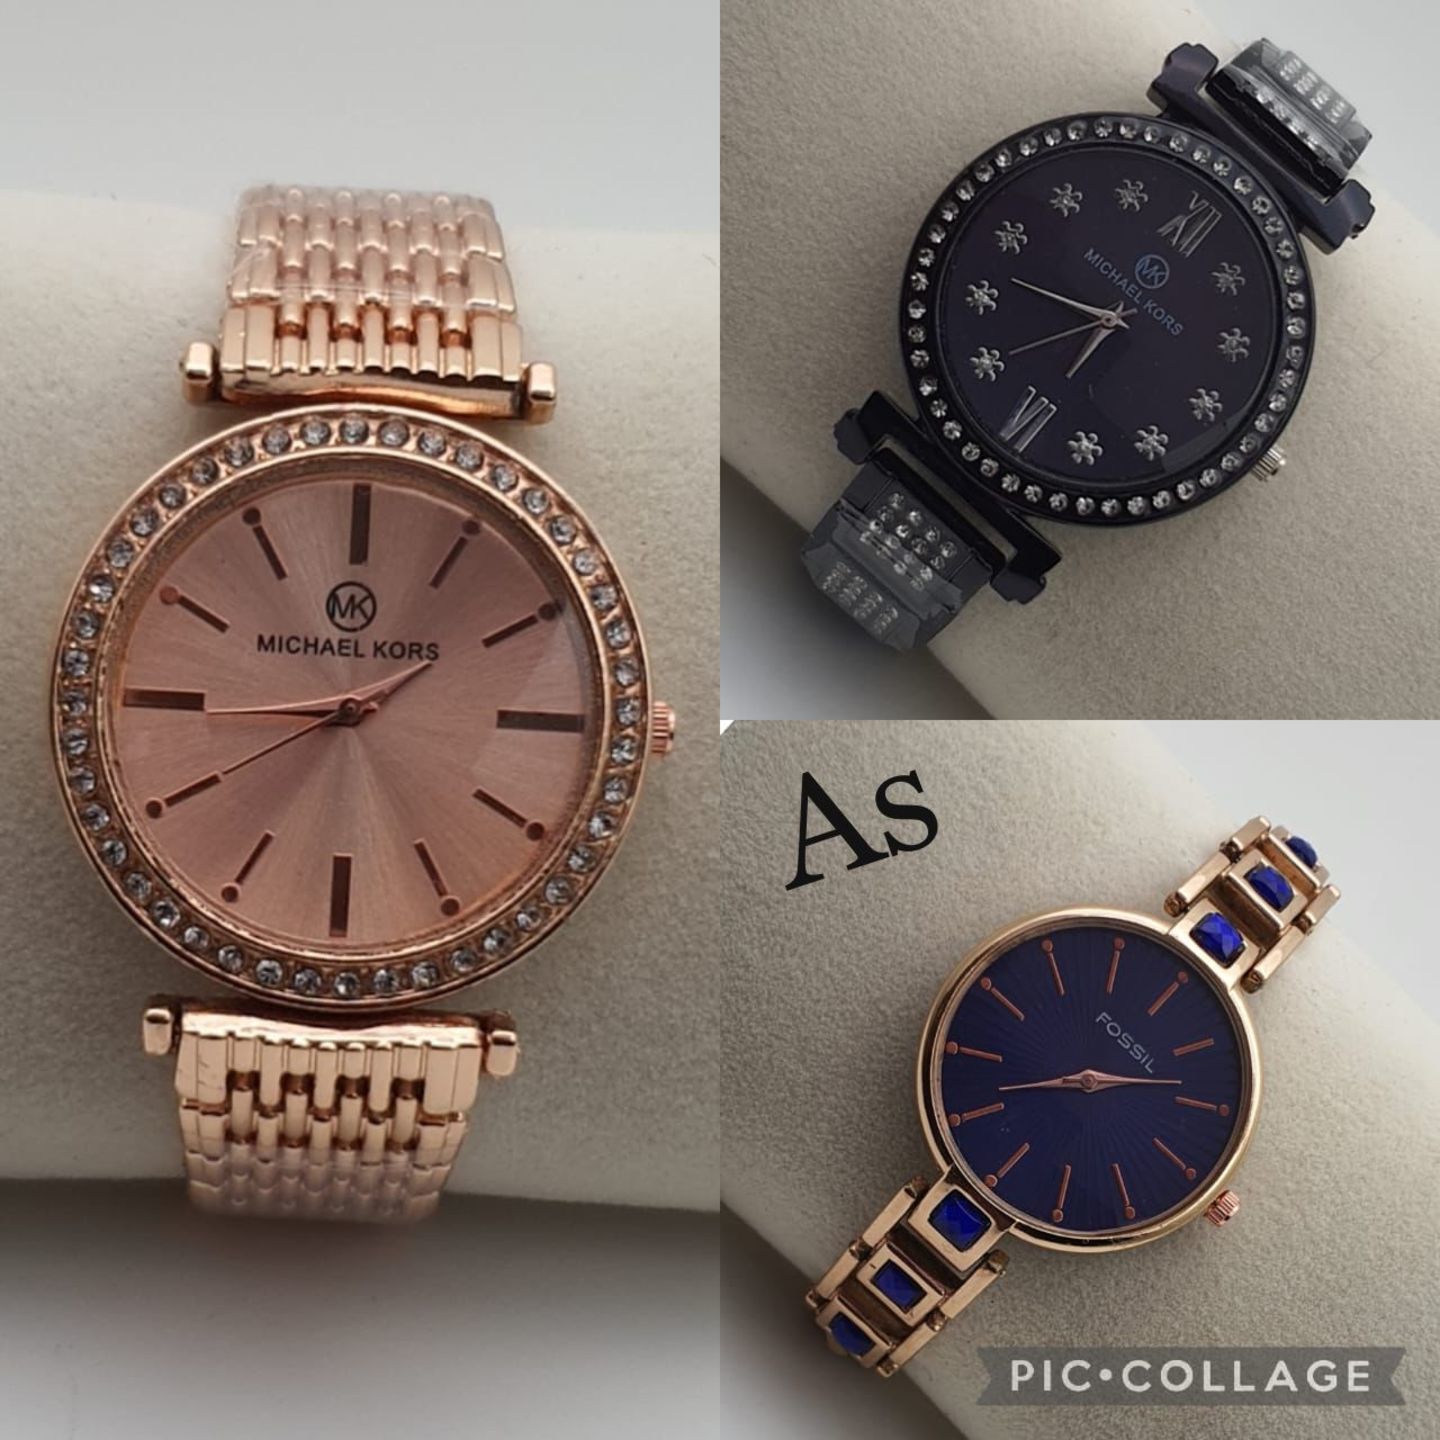 Ladies Micheal Kors,fossil Combo Watch Gift Engagement, anniversary, valentines day, mothers day for sister, wife,friend,mother, baby shower